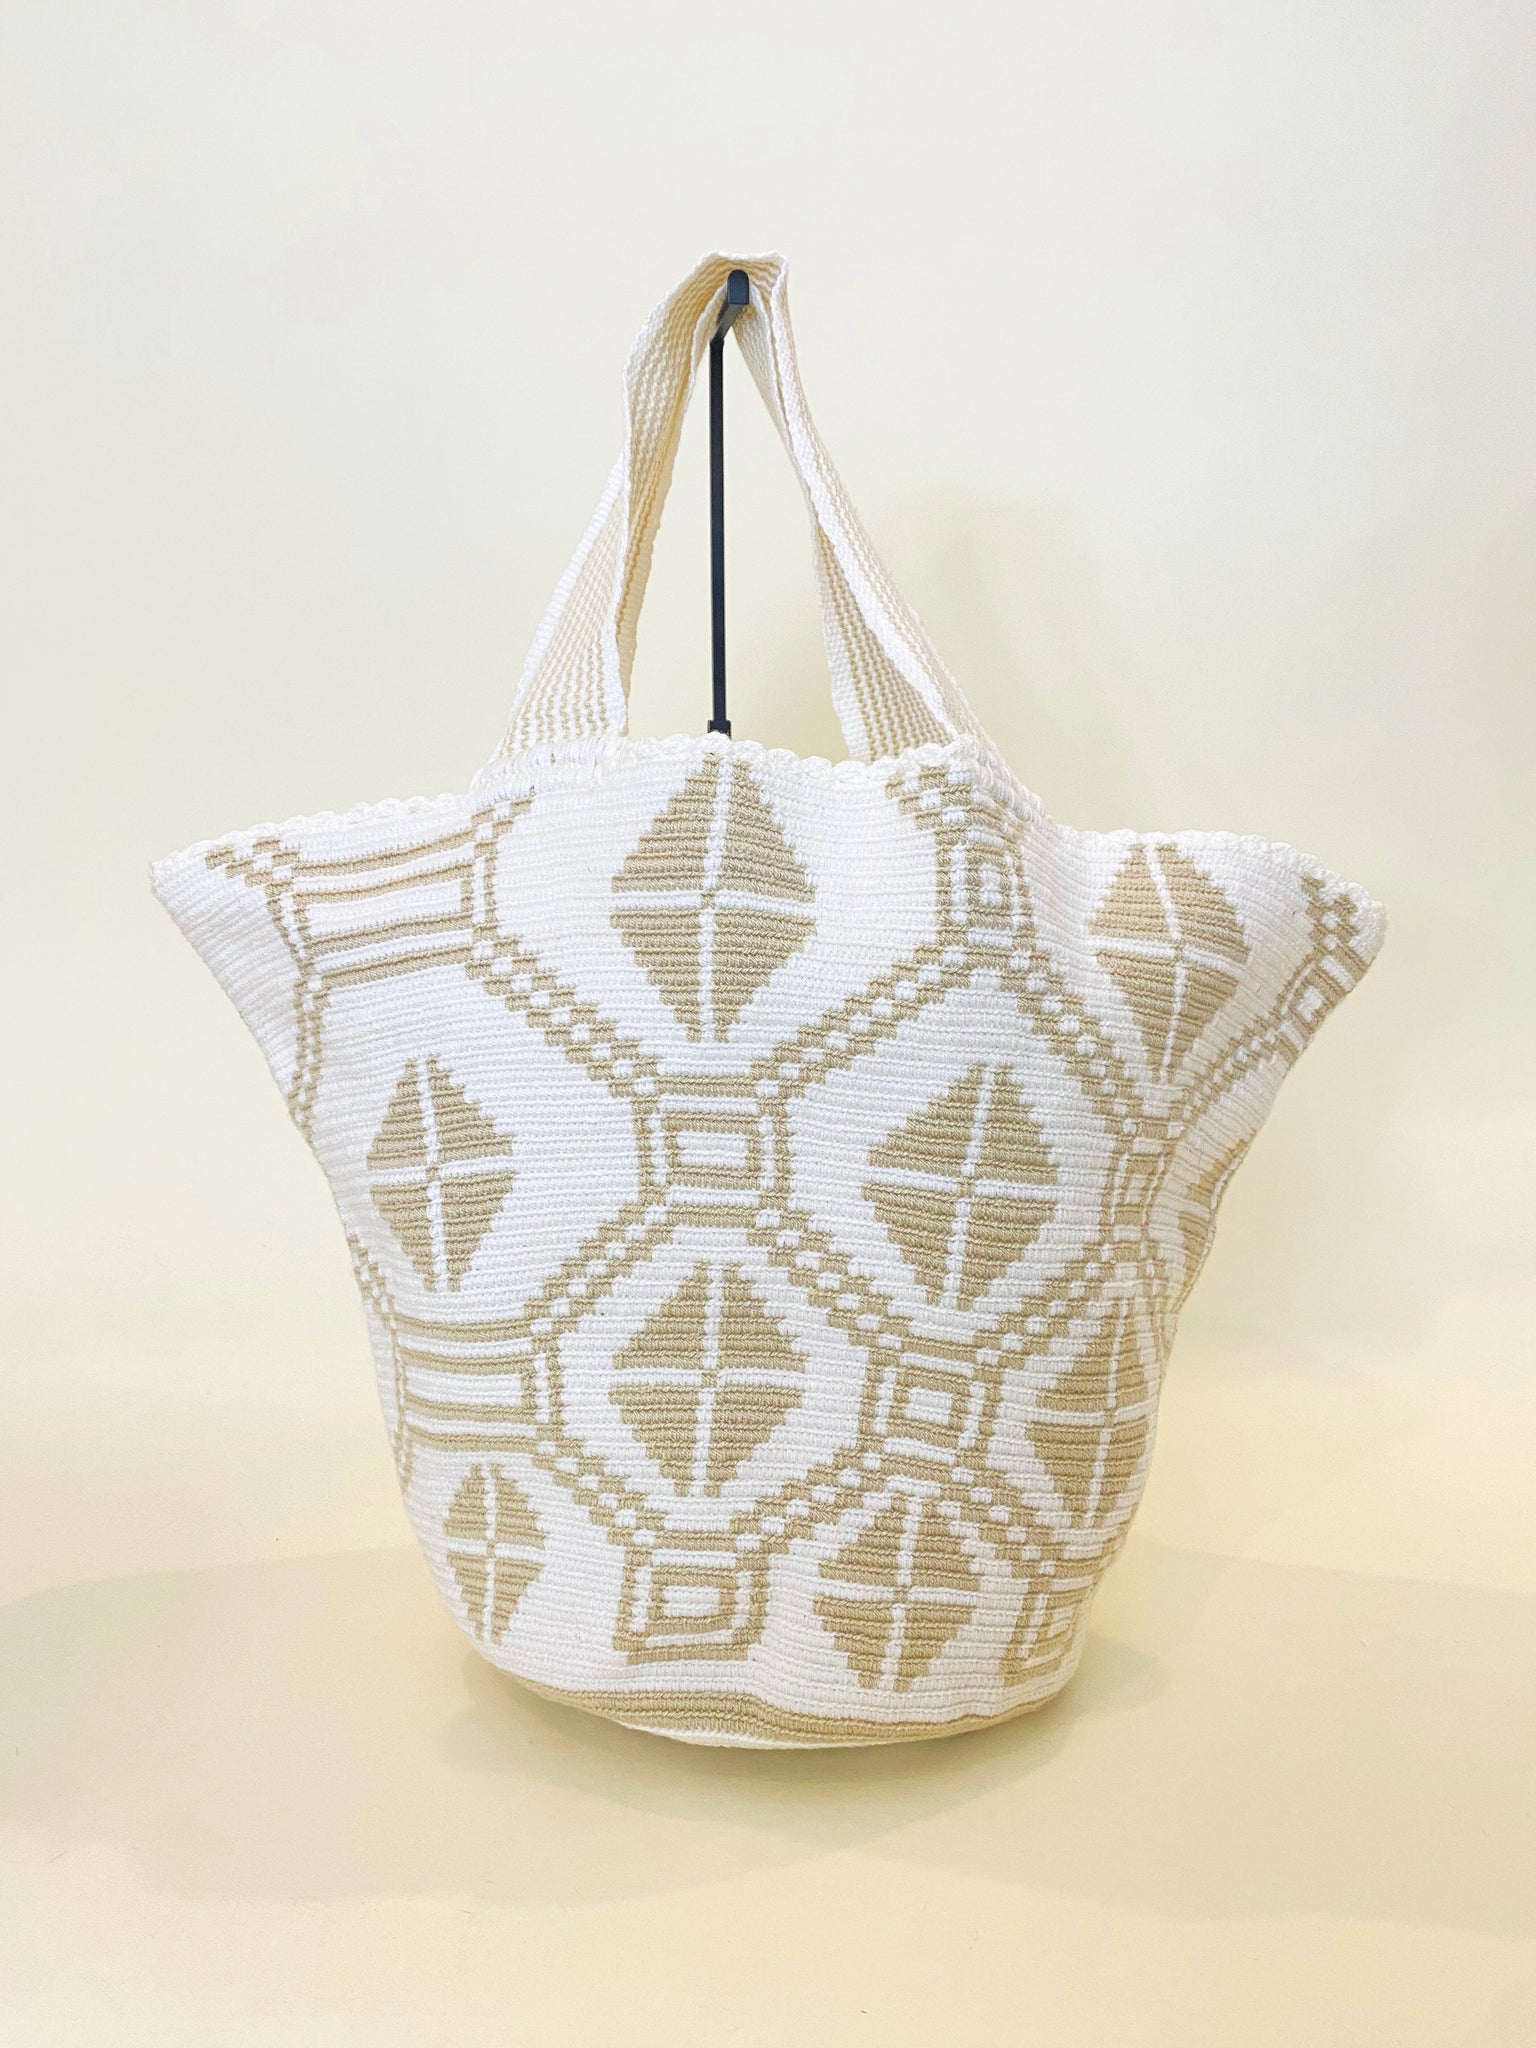 The Ivy Tote